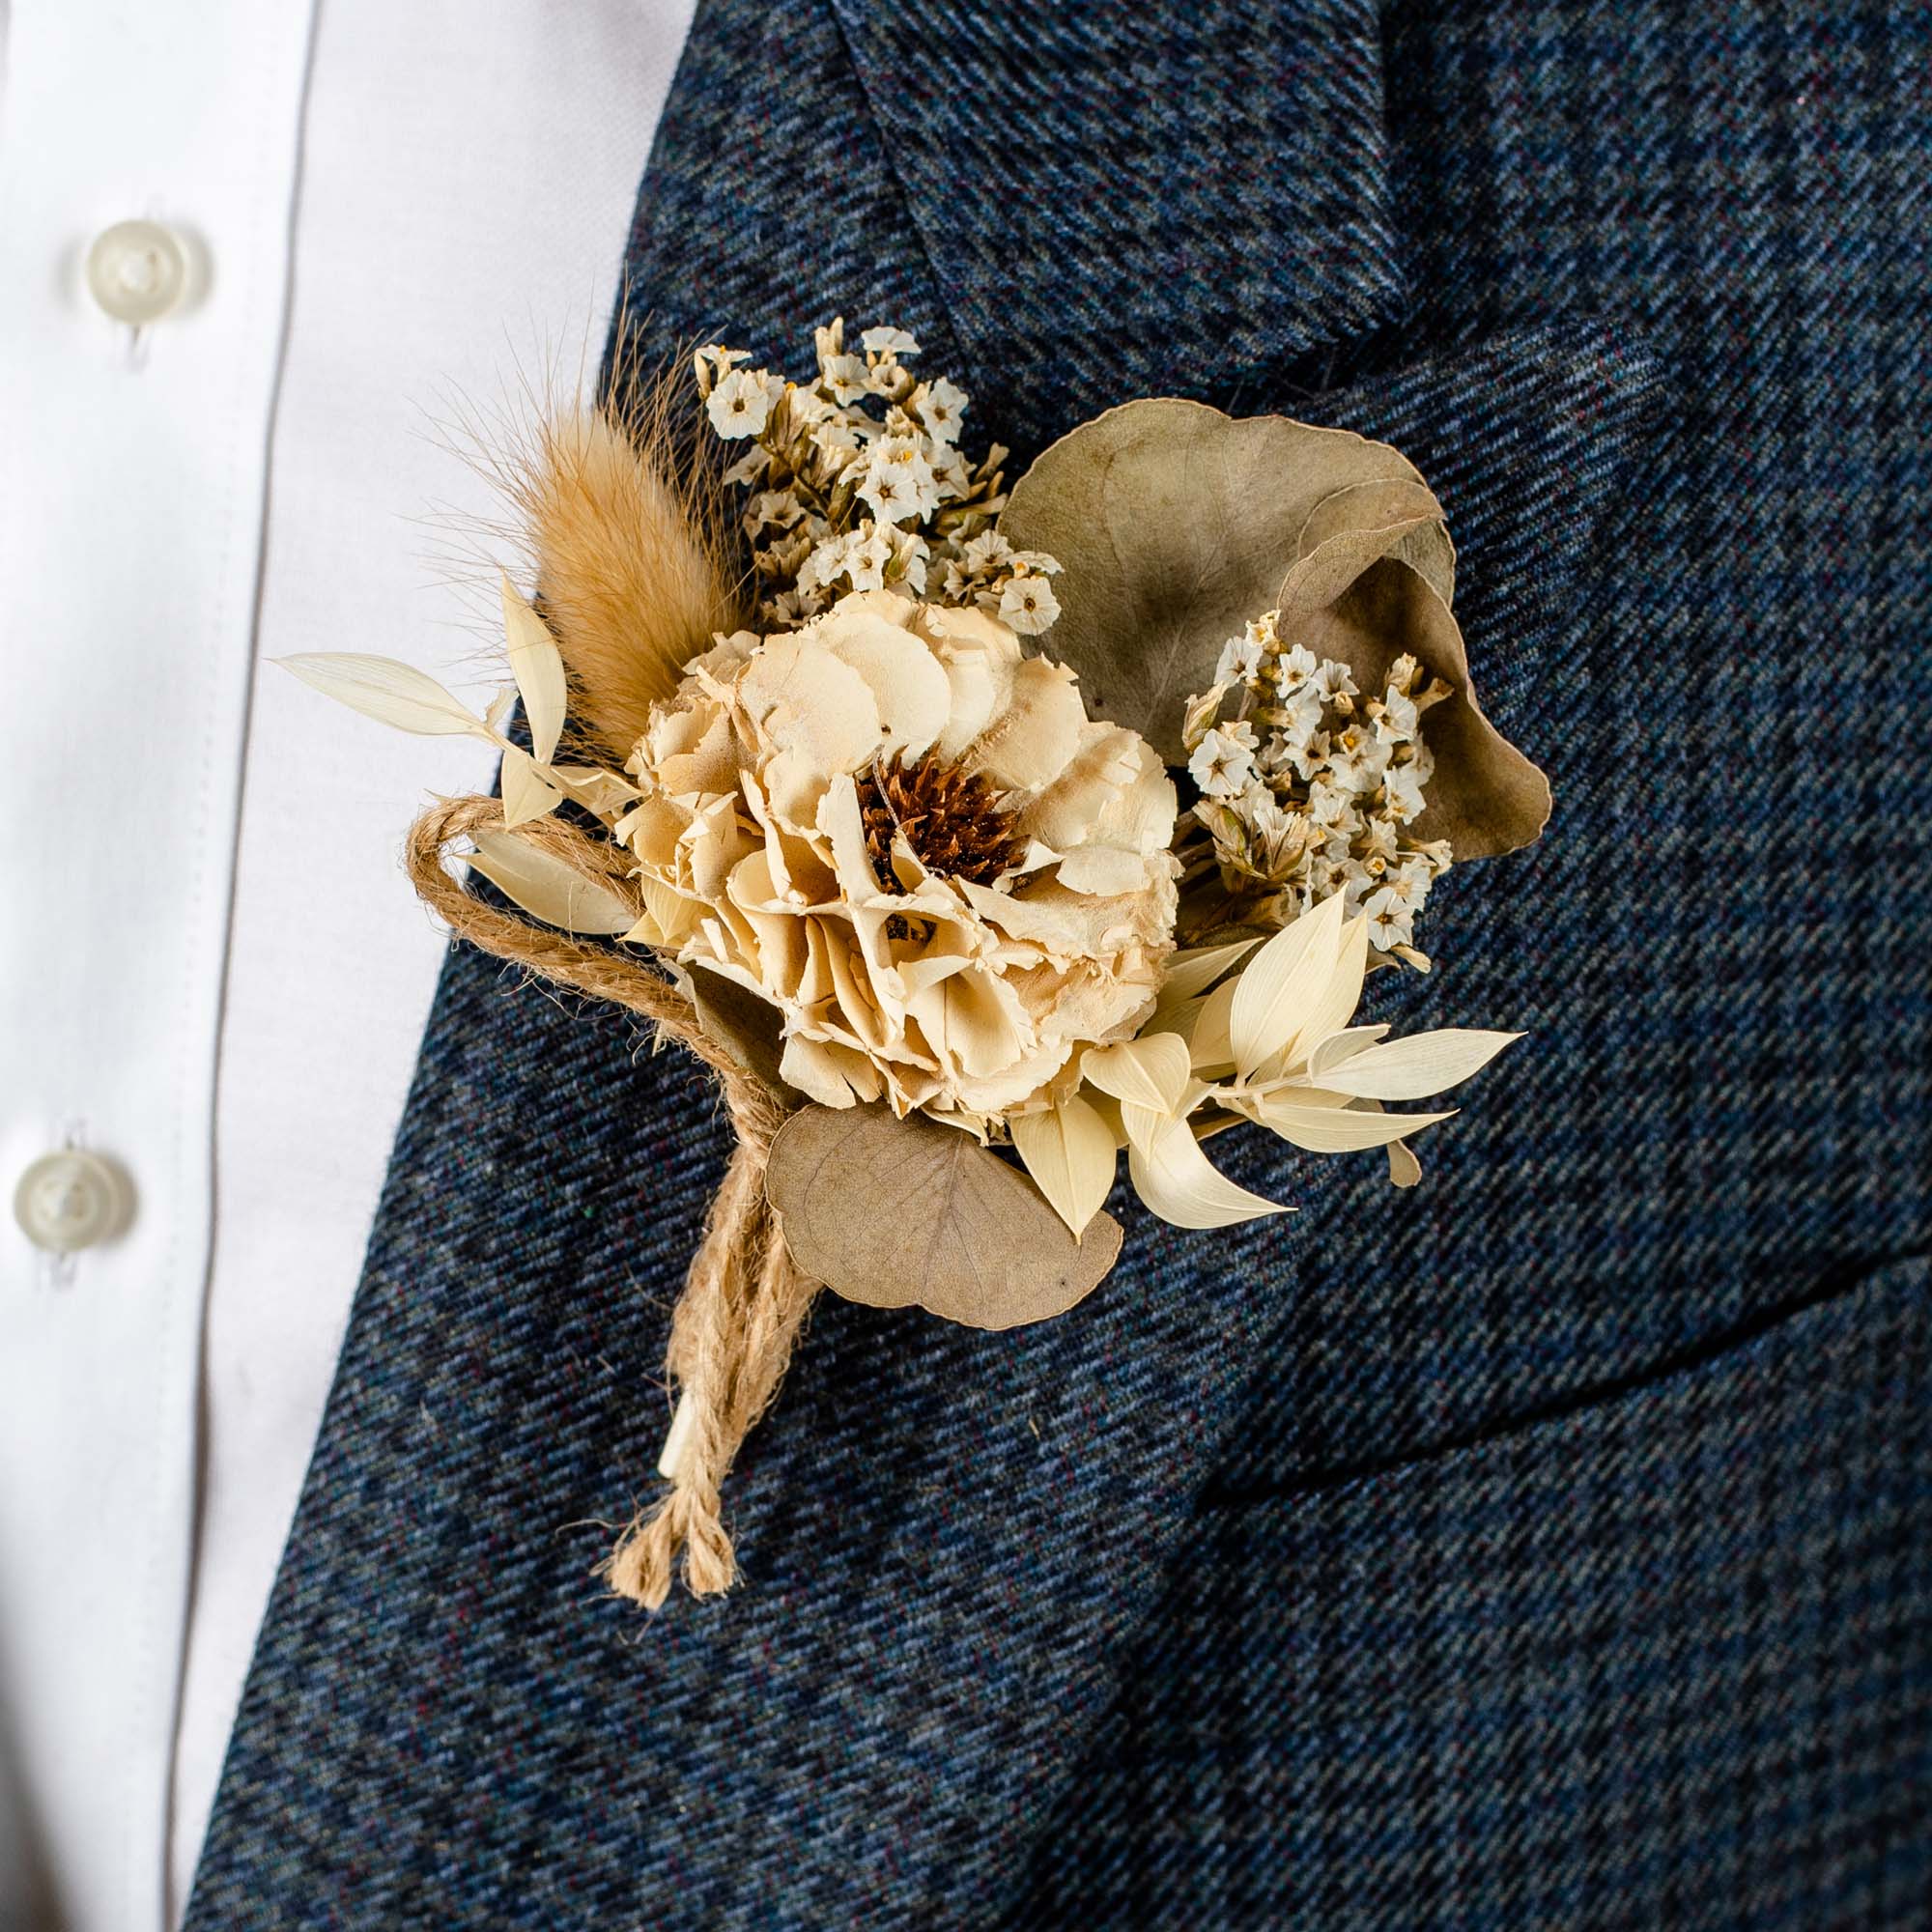 Oliver Dried Flower Boutonniere